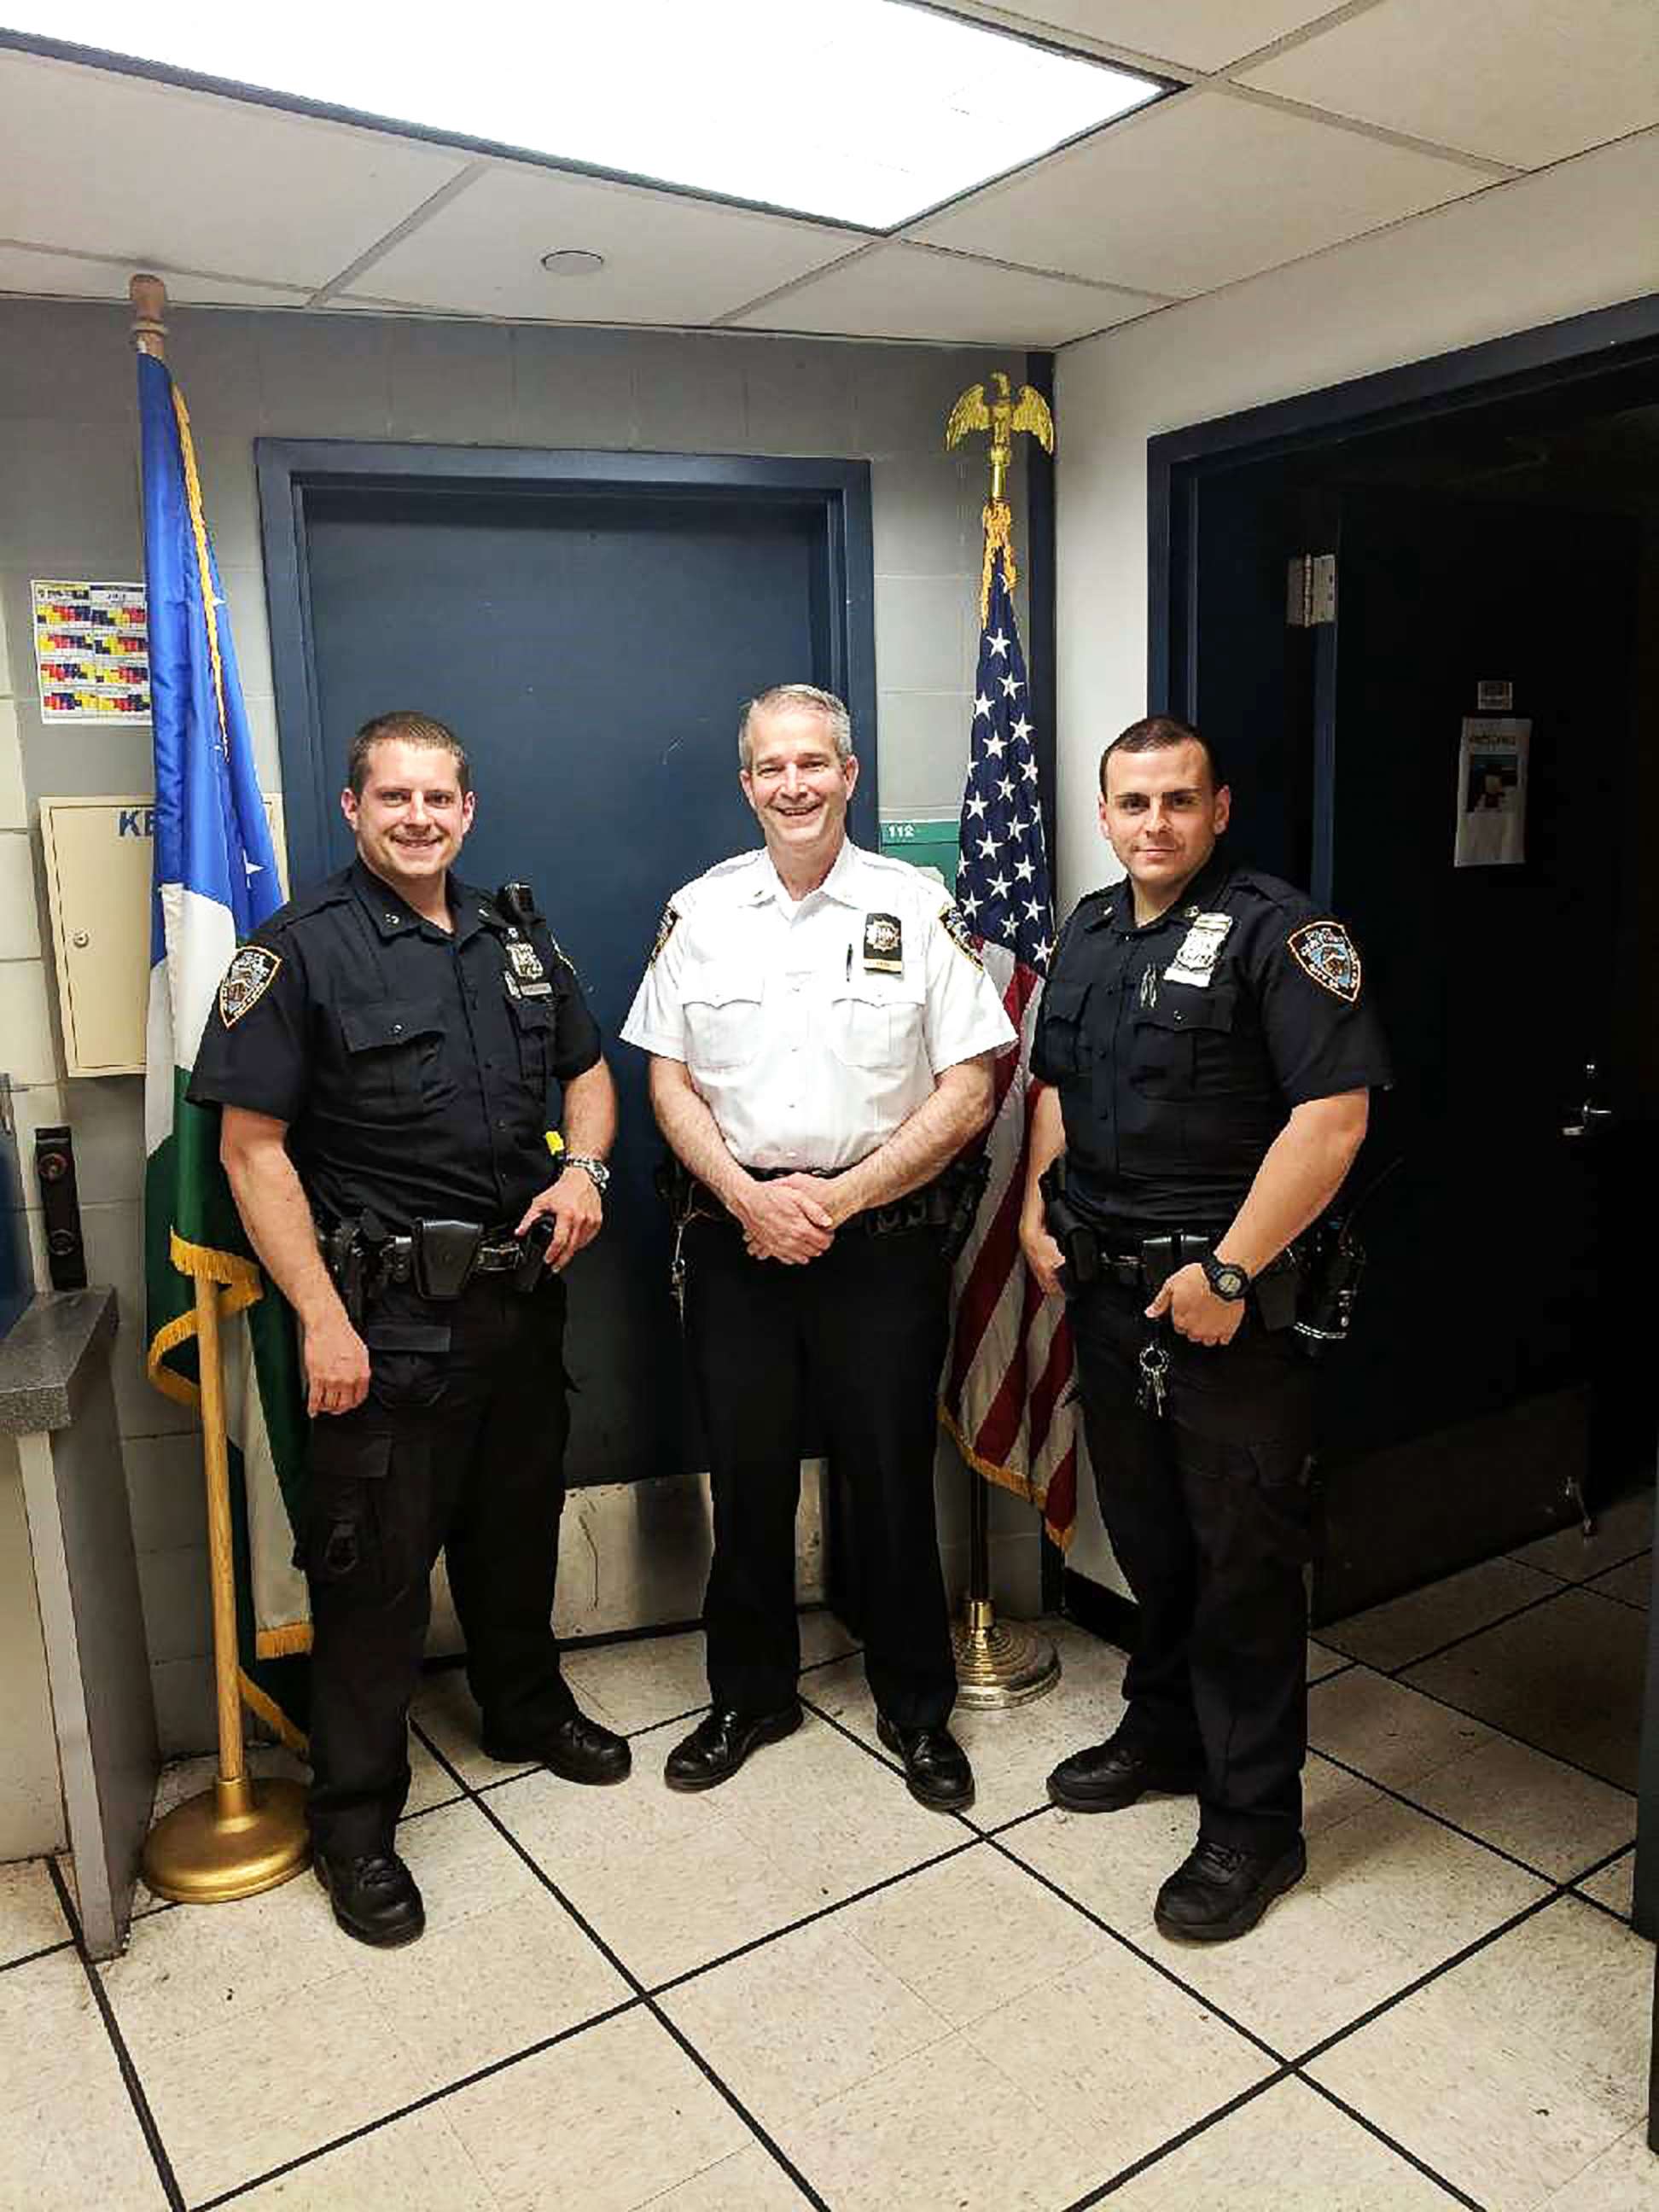 PHOTO: Lt. Patrick King and Officer Daniel Newman responded to Officer Michael Pace and Officer Joseph Doyle's call for a baby that wasn't breathing.